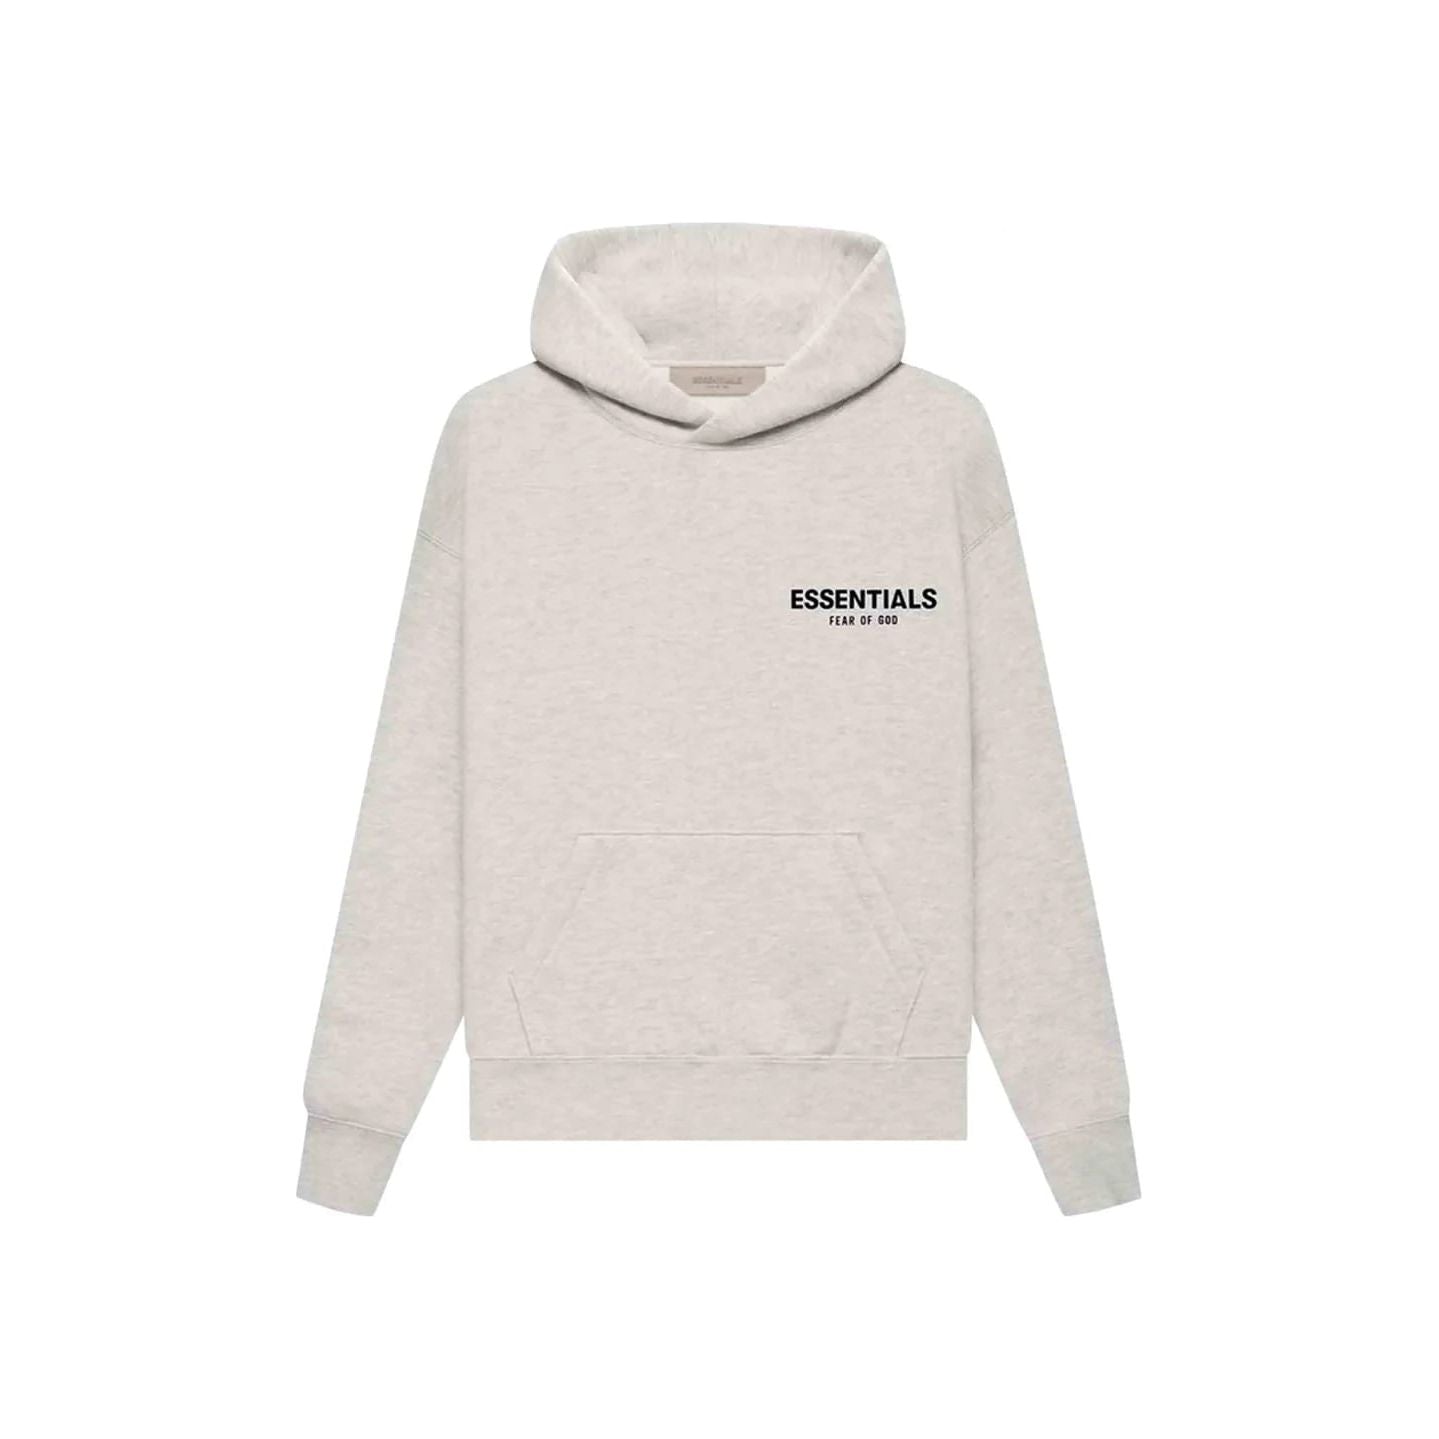 ESSENTIALS Pull-Over Hoodie 'Light Oatmeal' SS22